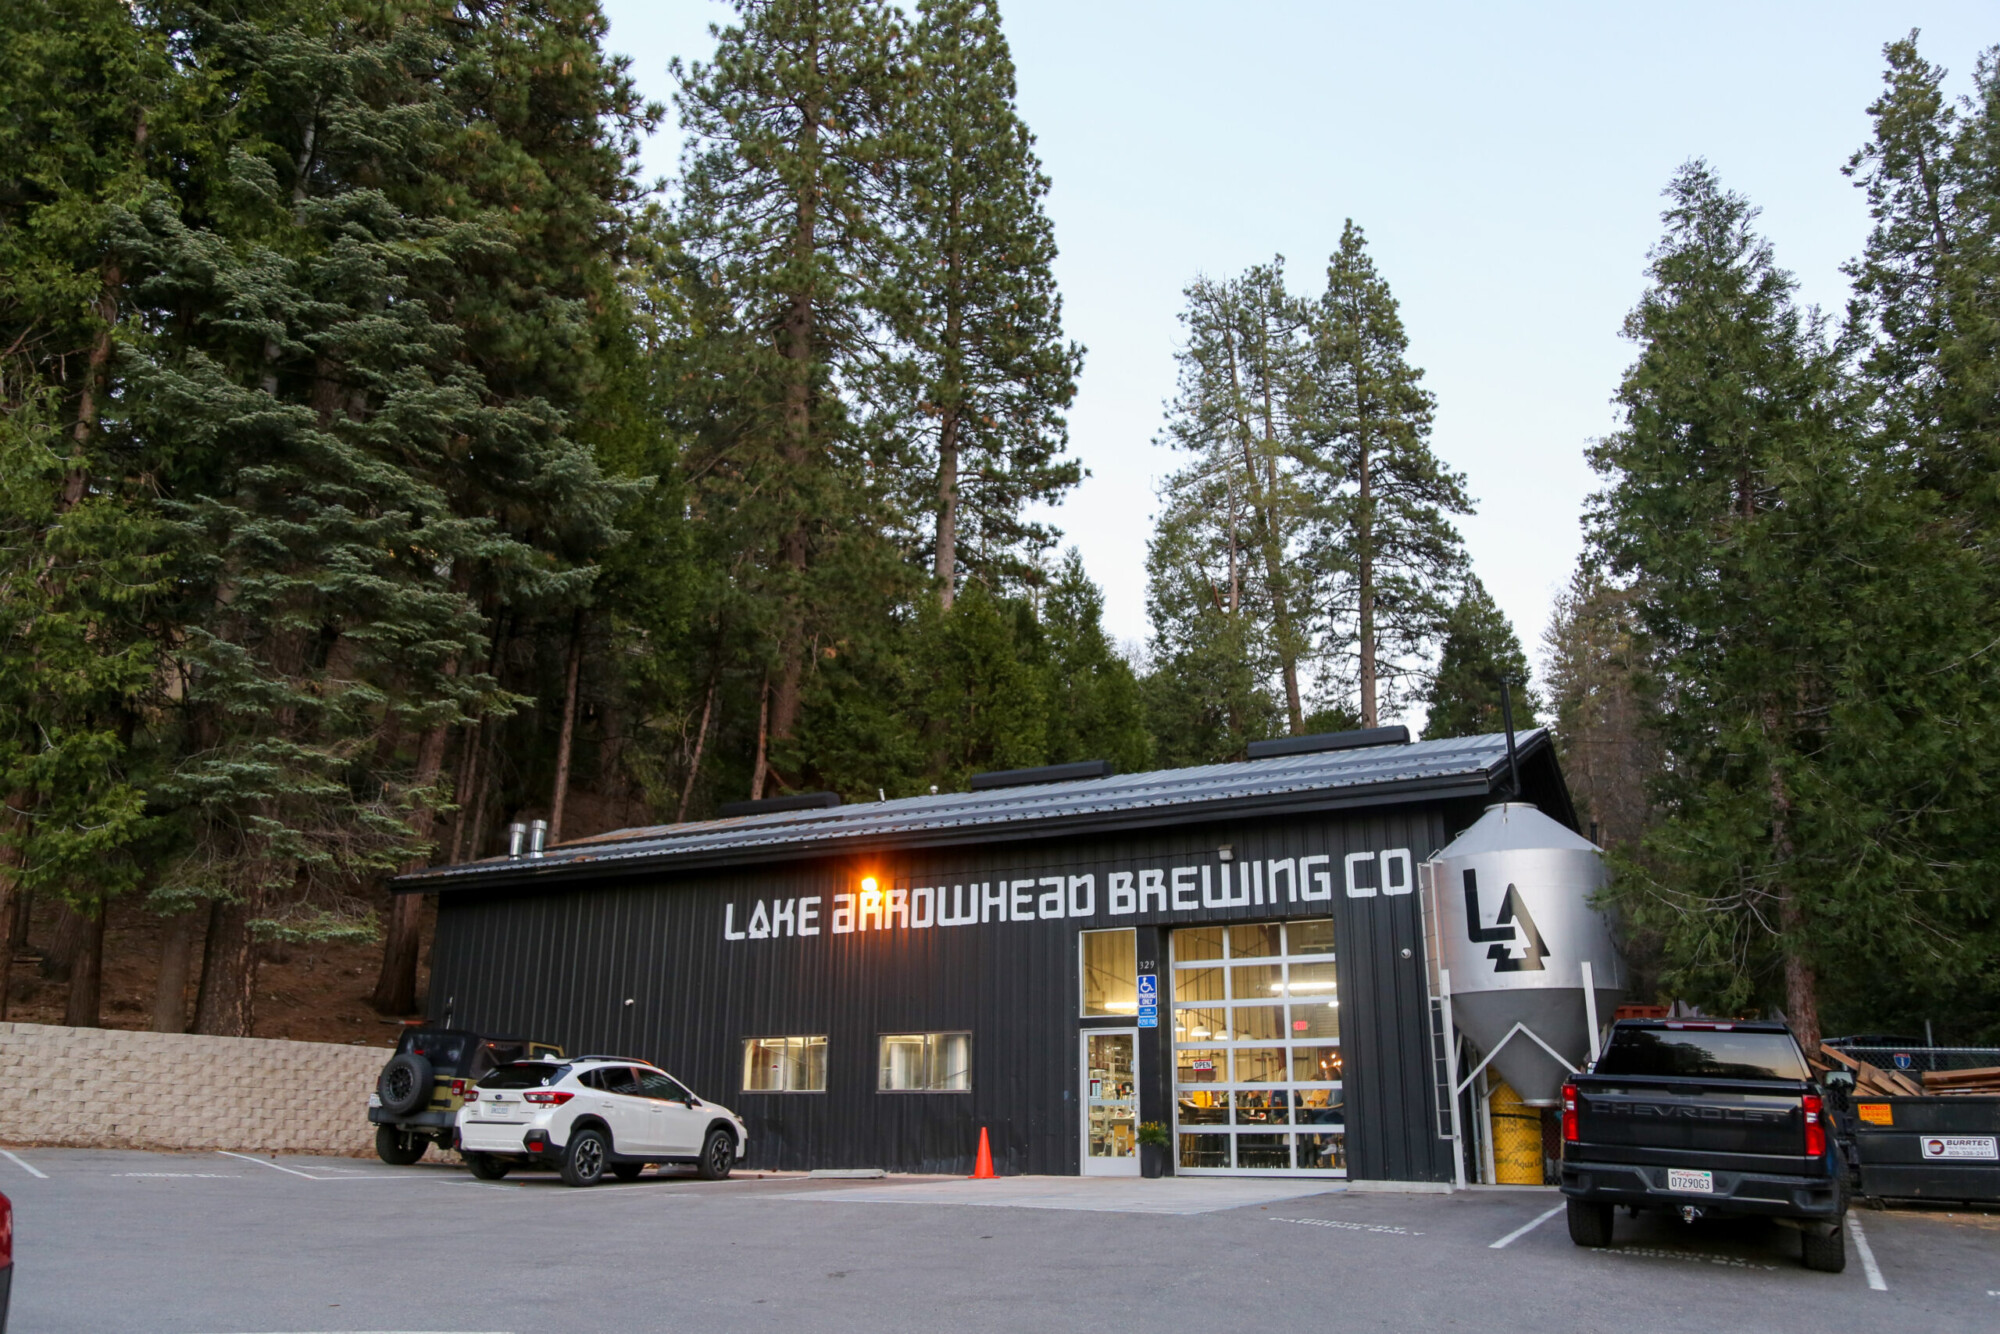 Exterior view of Lake Arrowhead Brewing Company building tucked against a conifer forest in Lake Arrowhead, California.